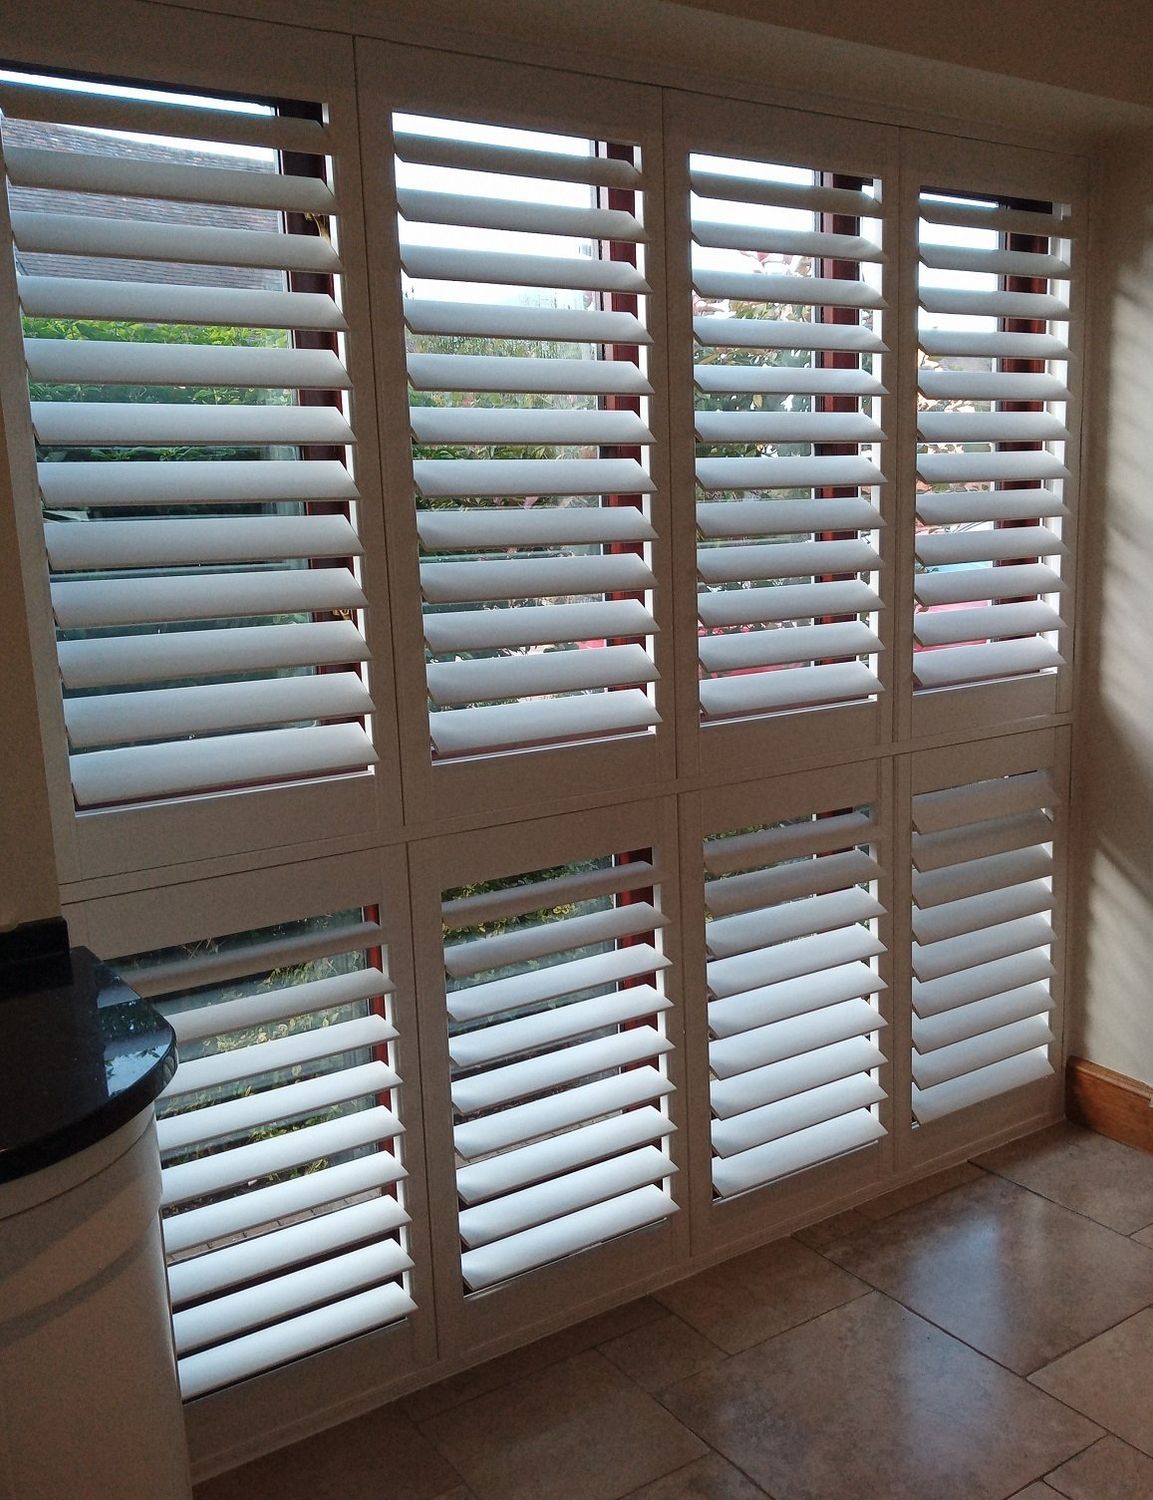 Sutton Coldfield Plantation Shutters Recent Installation Birmingham Area 0121 3301778 The Local Company In the north of Birmingham West Midlands England UK